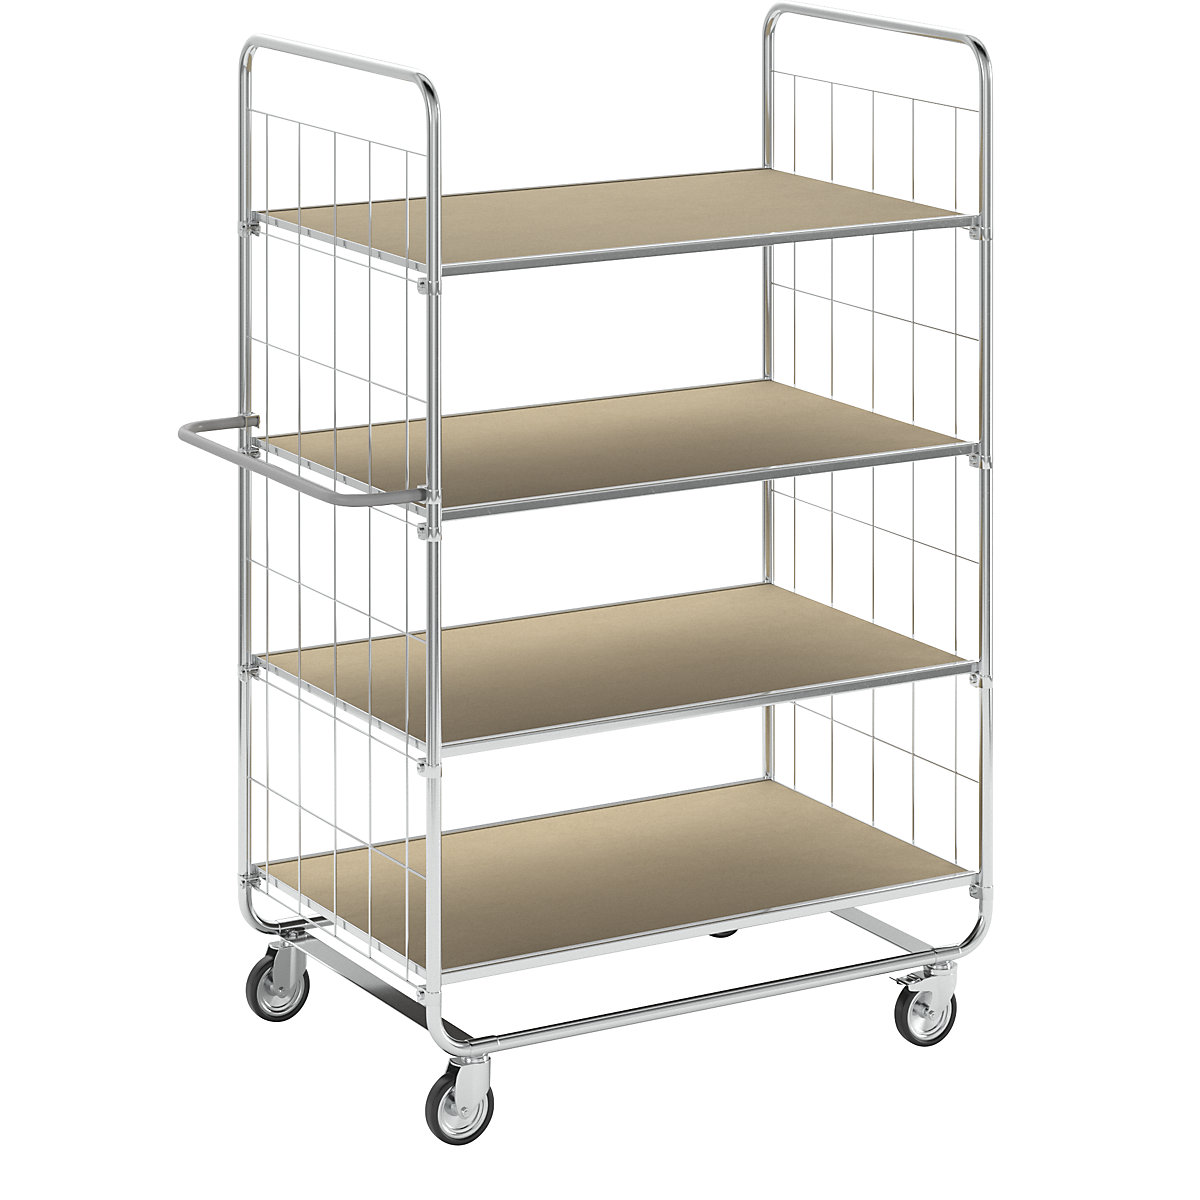 ESD shelf truck, with 4 shelves – Kongamek, 4 castors, 2 with stops, LxWxH 815 x 470 x 1120 mm, 2+ items-11